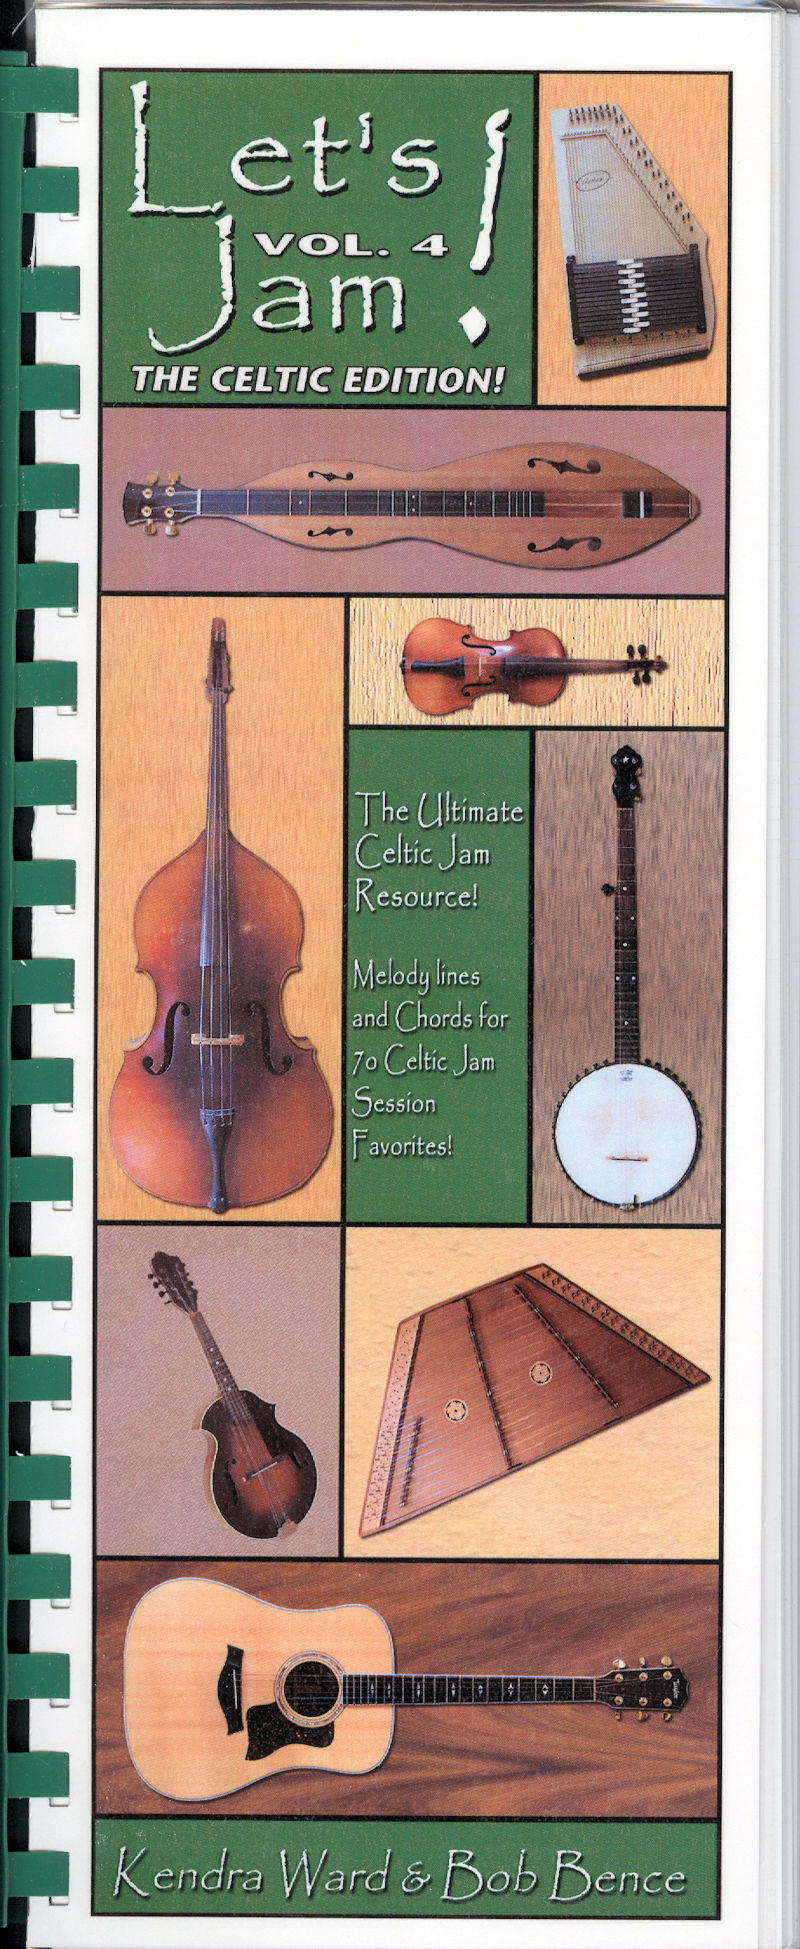 Let's jam Let's Jam! Vol. 4 The Celtic Edition - by Kendra Ward and Bob Bence some traditional Celtic music from our repertoire of Celtic Session tunes.